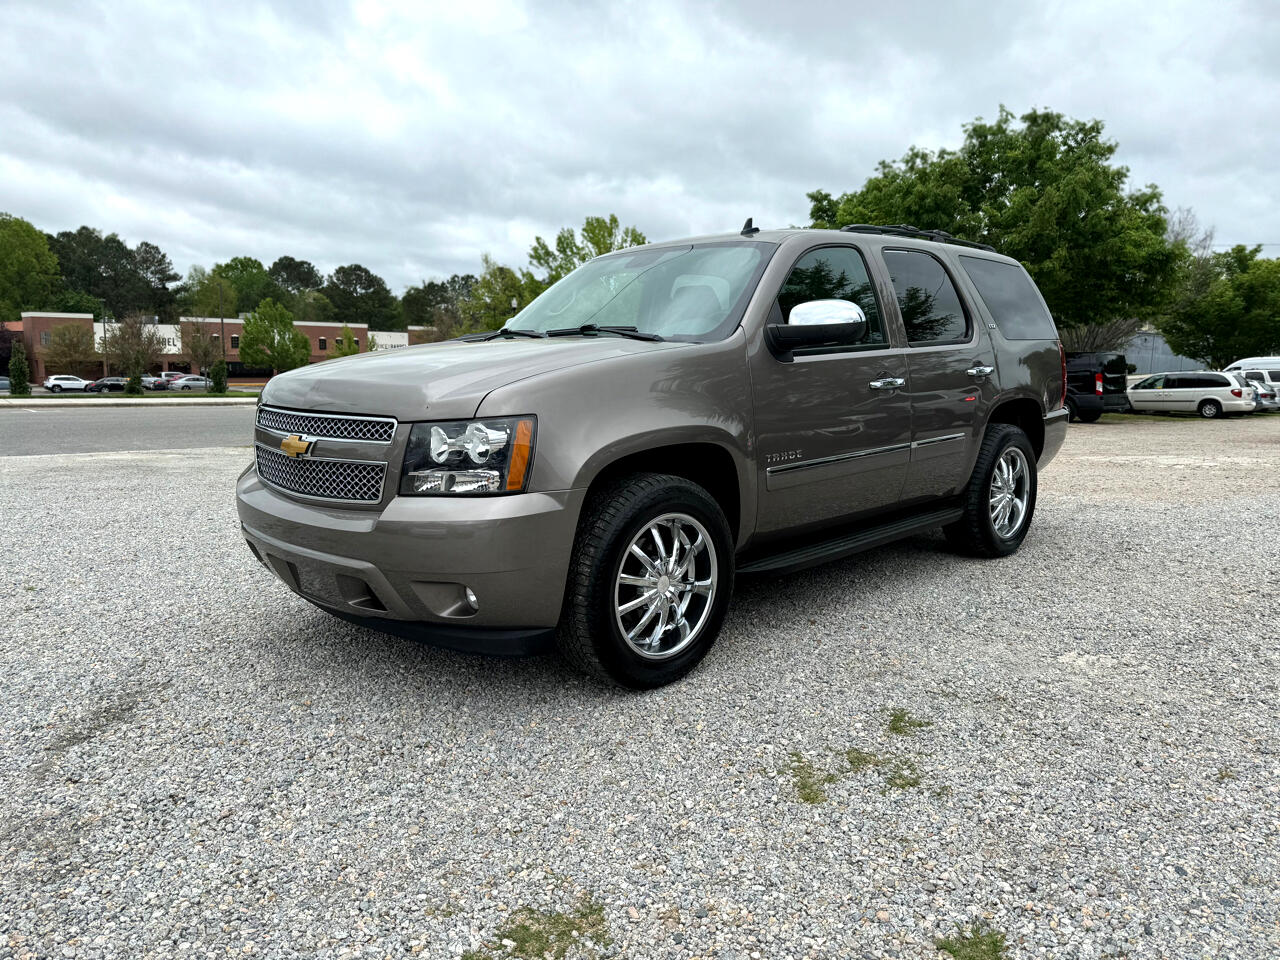 2013 Chevrolet Tahoe Wake Forest NC